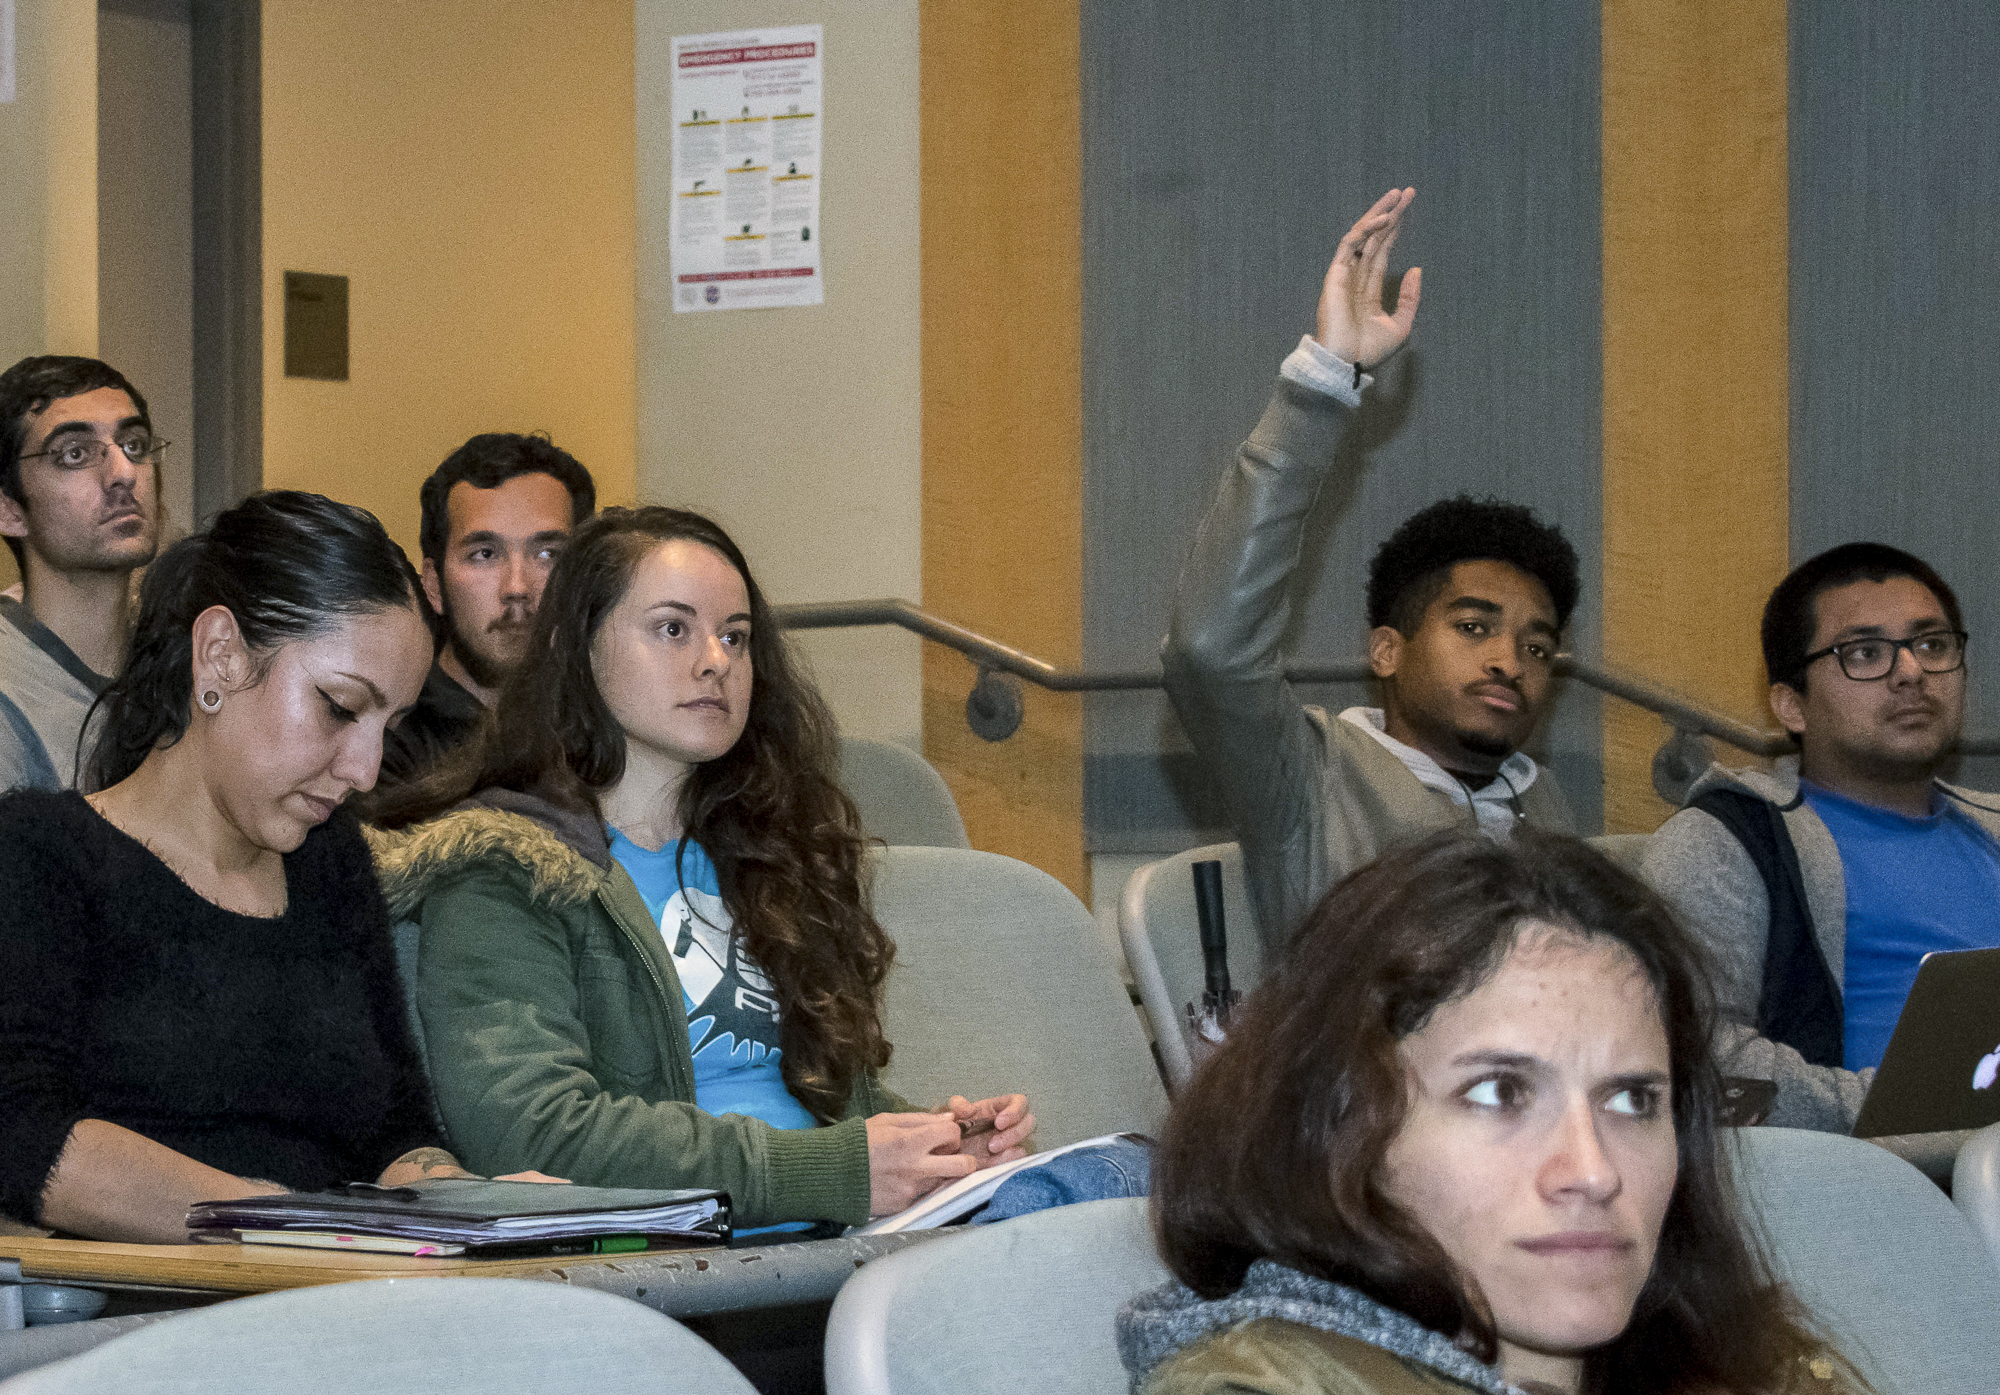  On Thursday, March 22, a vote was held during the Inter-Club Council meeting campus at Santa Monica College  to either stick with the previously-voted upon theme of Black Panther for Club Row, a school event on campus or decide on a new theme and Ch